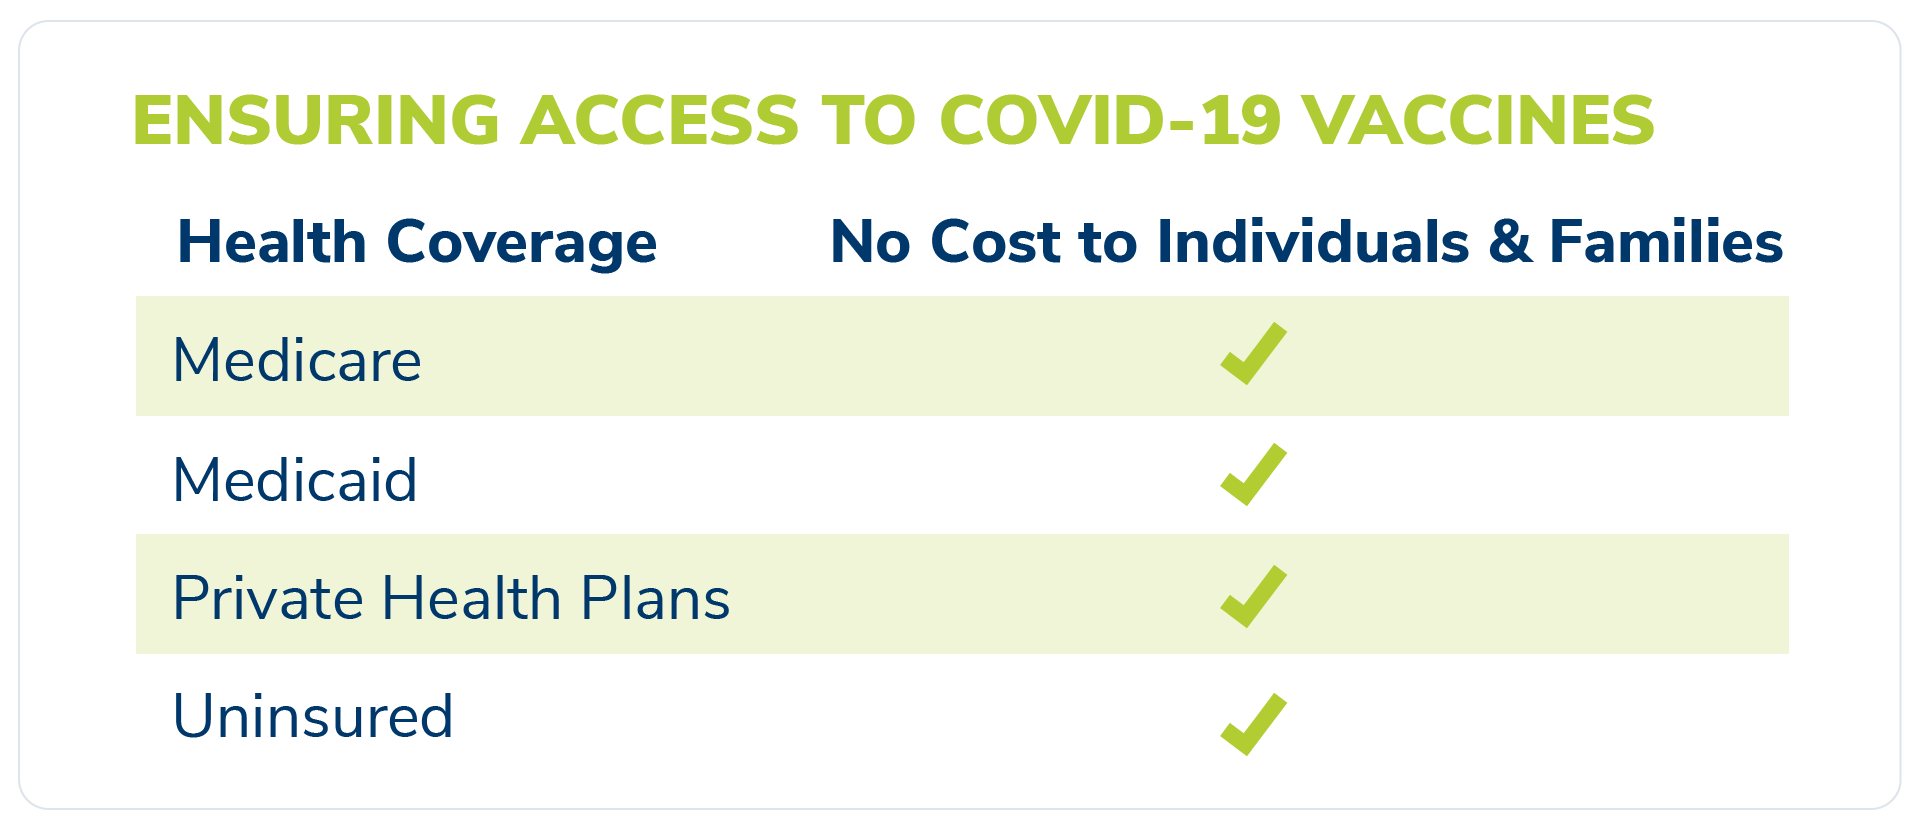 Access to Covid-19 Vaccines